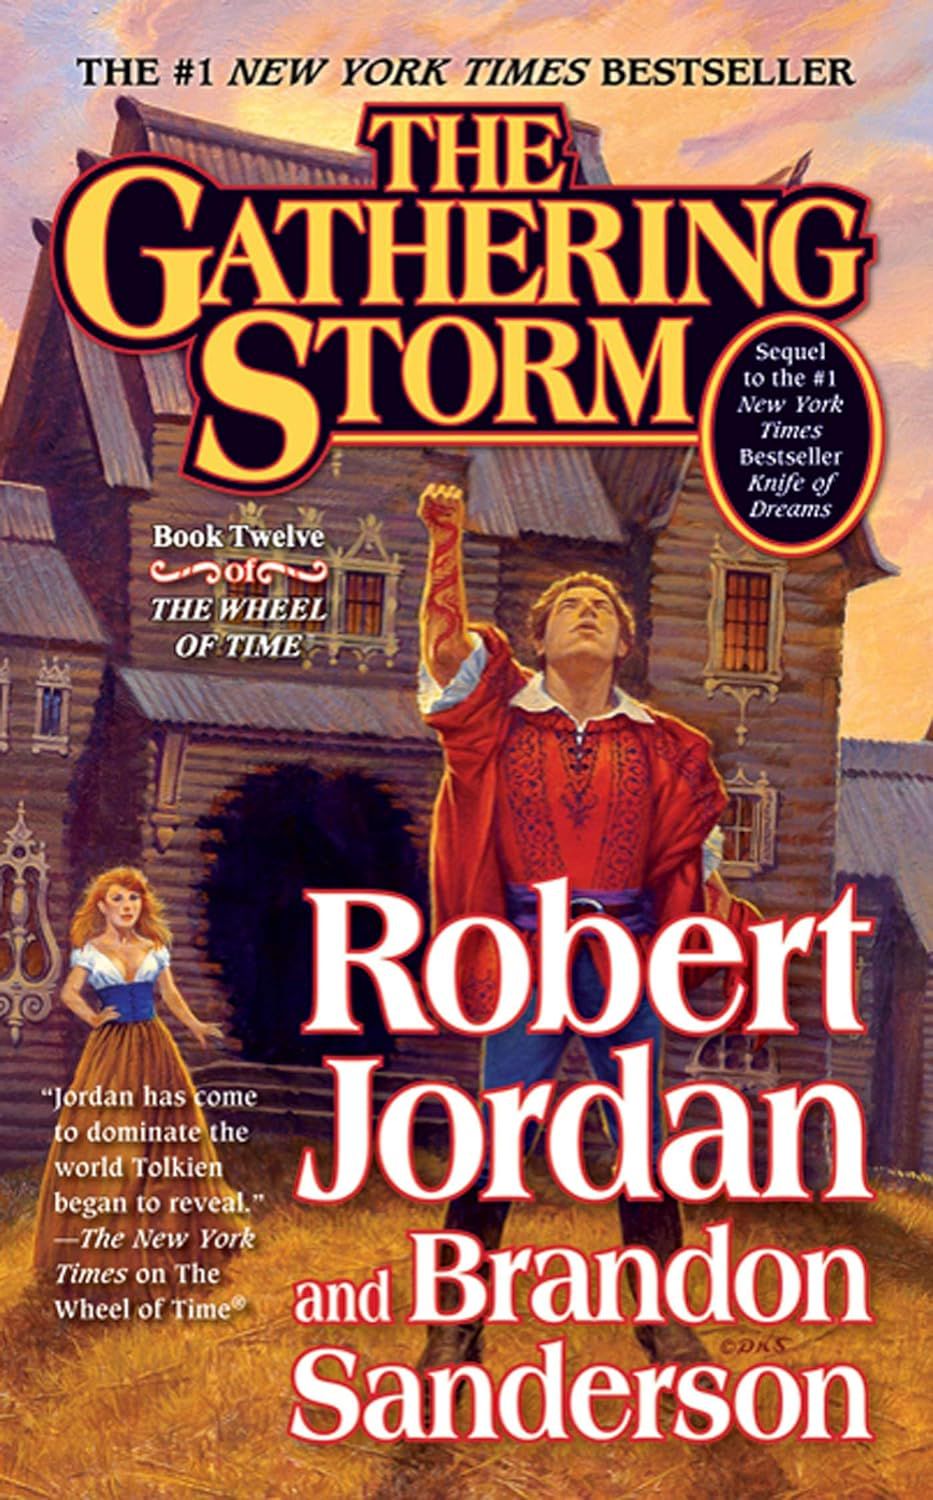 A man stands outside a house in a fantasy setting with his fist in the air on the book cover for The Gathering Storm.